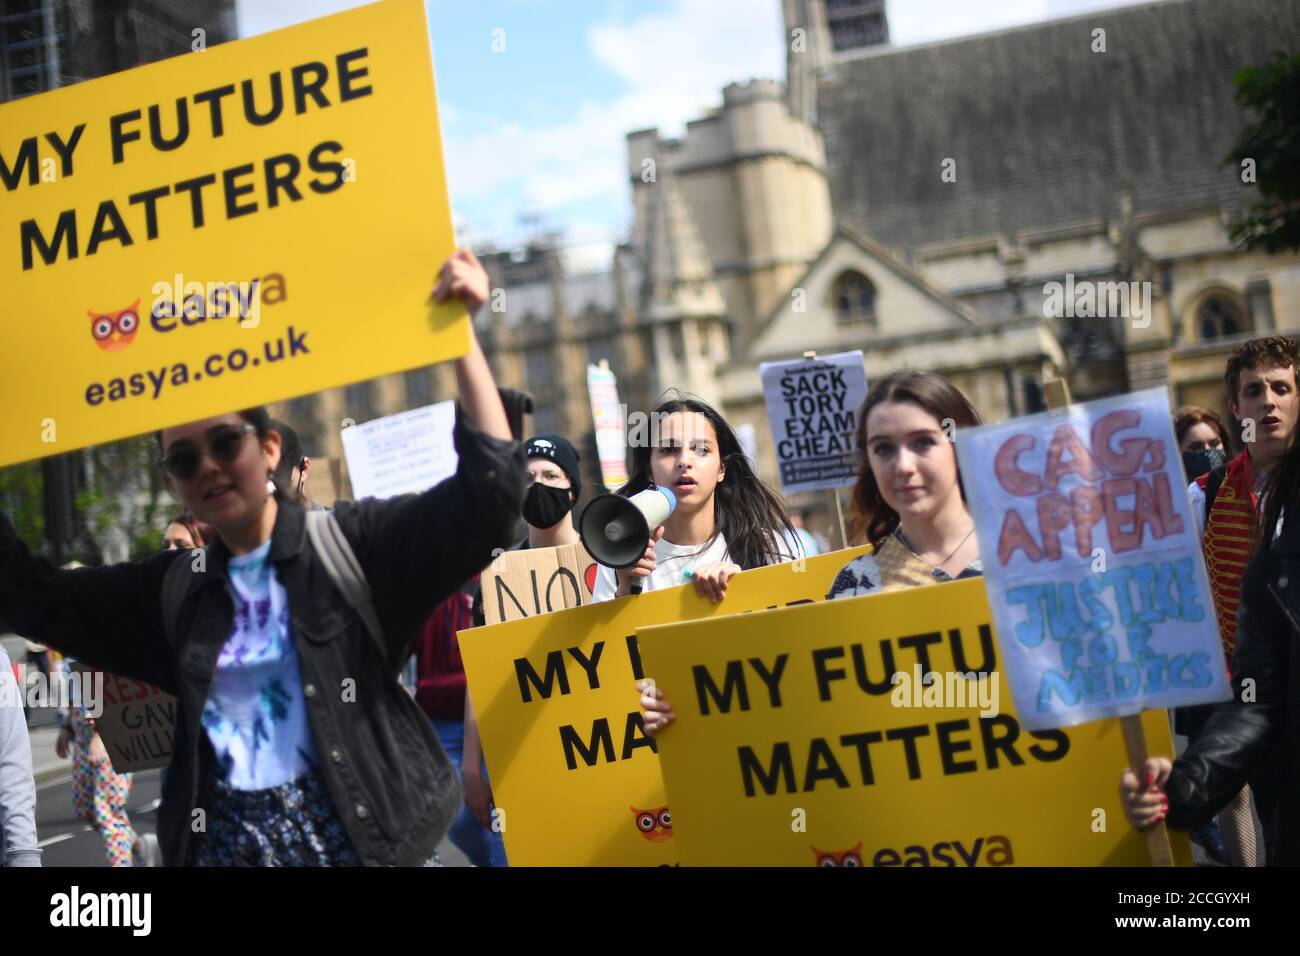 Students take part in a march from Marble Arch to the Department of Education in Westminster, London, calling for the resignation of Education Secretary Gavin Williamson over the government's handling of exam results after A-level and GCSE exams were cancelled due to the coronavirus outbreak. Stock Photo